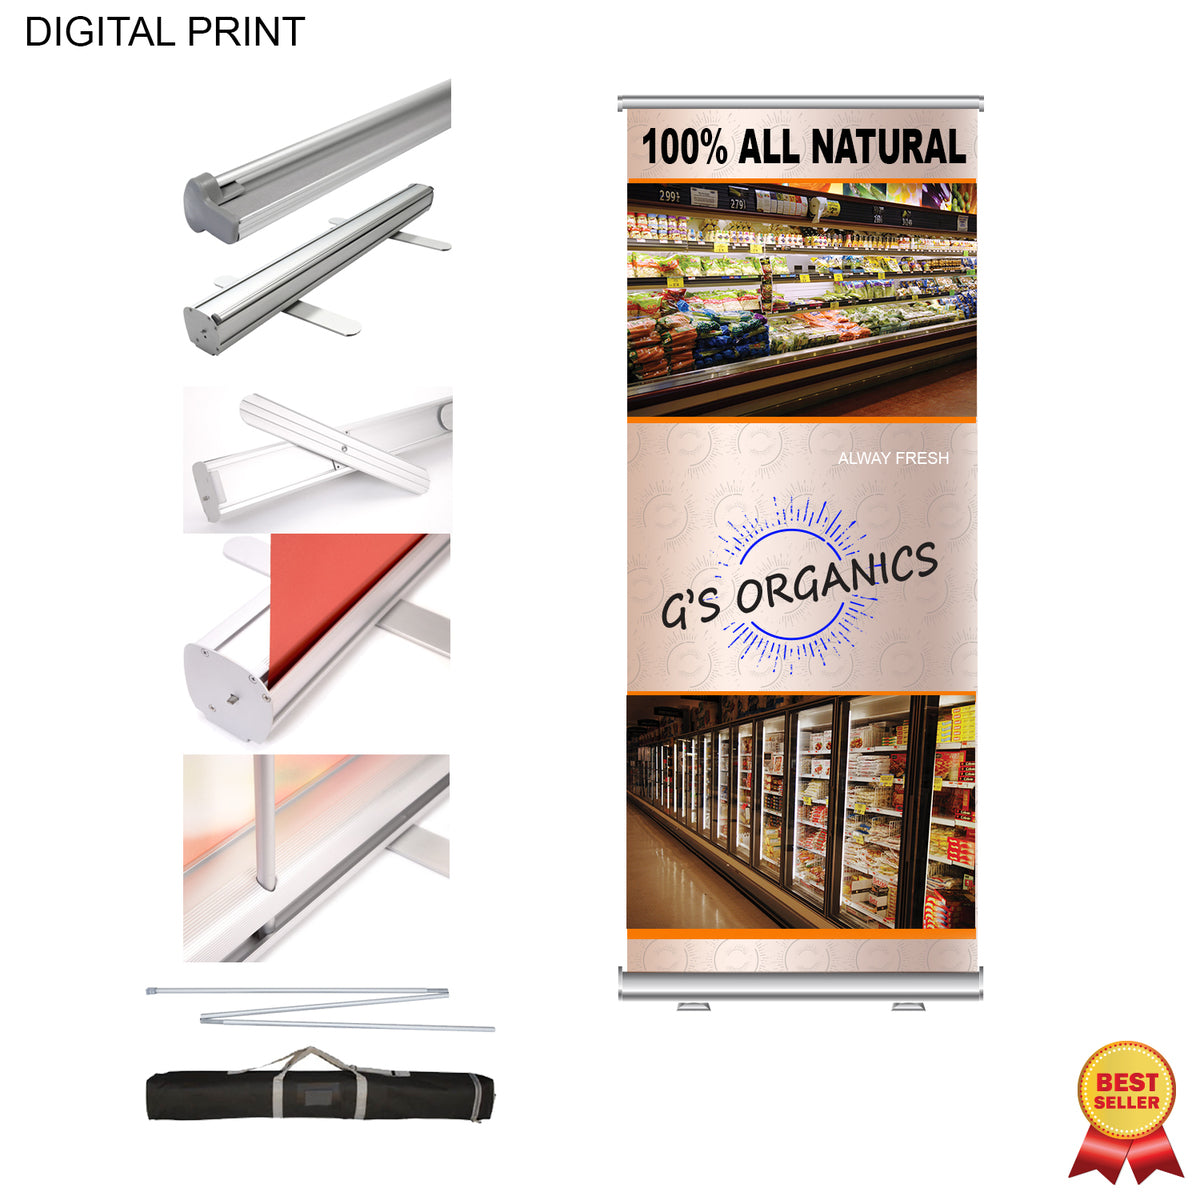 Premium Banner with Stand and Bag, 33.5x79